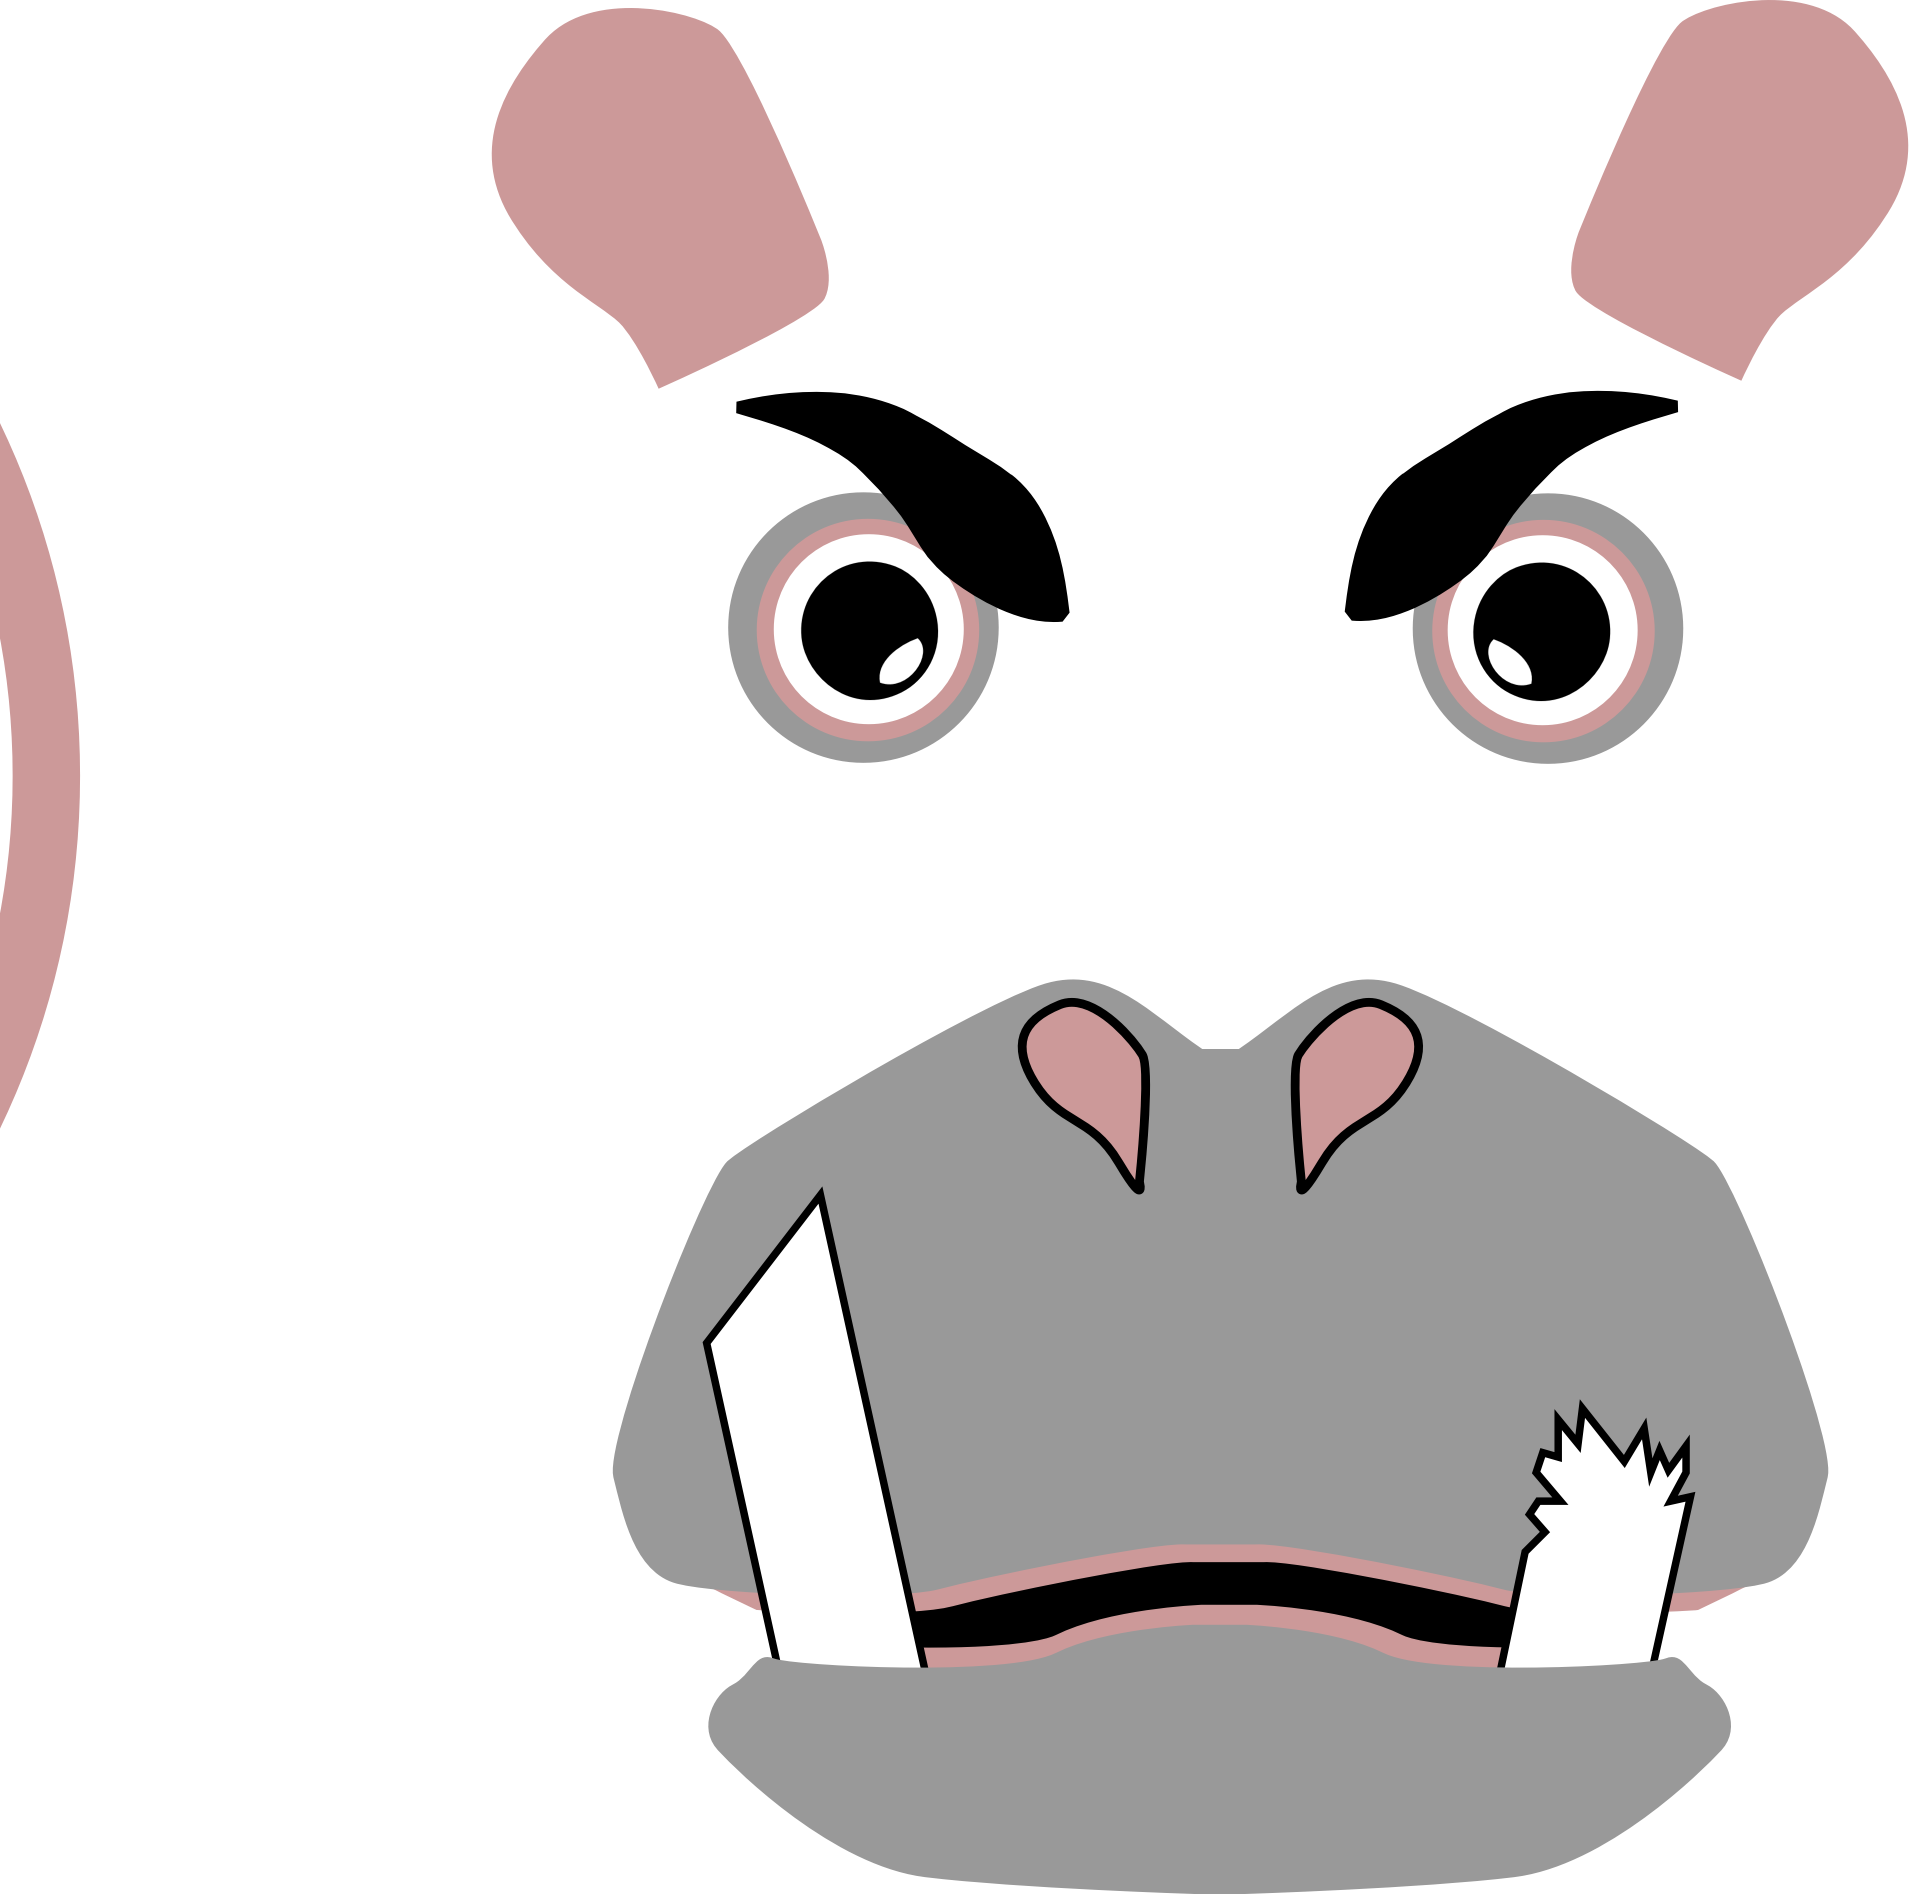 https://openclipart.org/image/2400px/svg_to_png/220599/angryhippo_logo.png